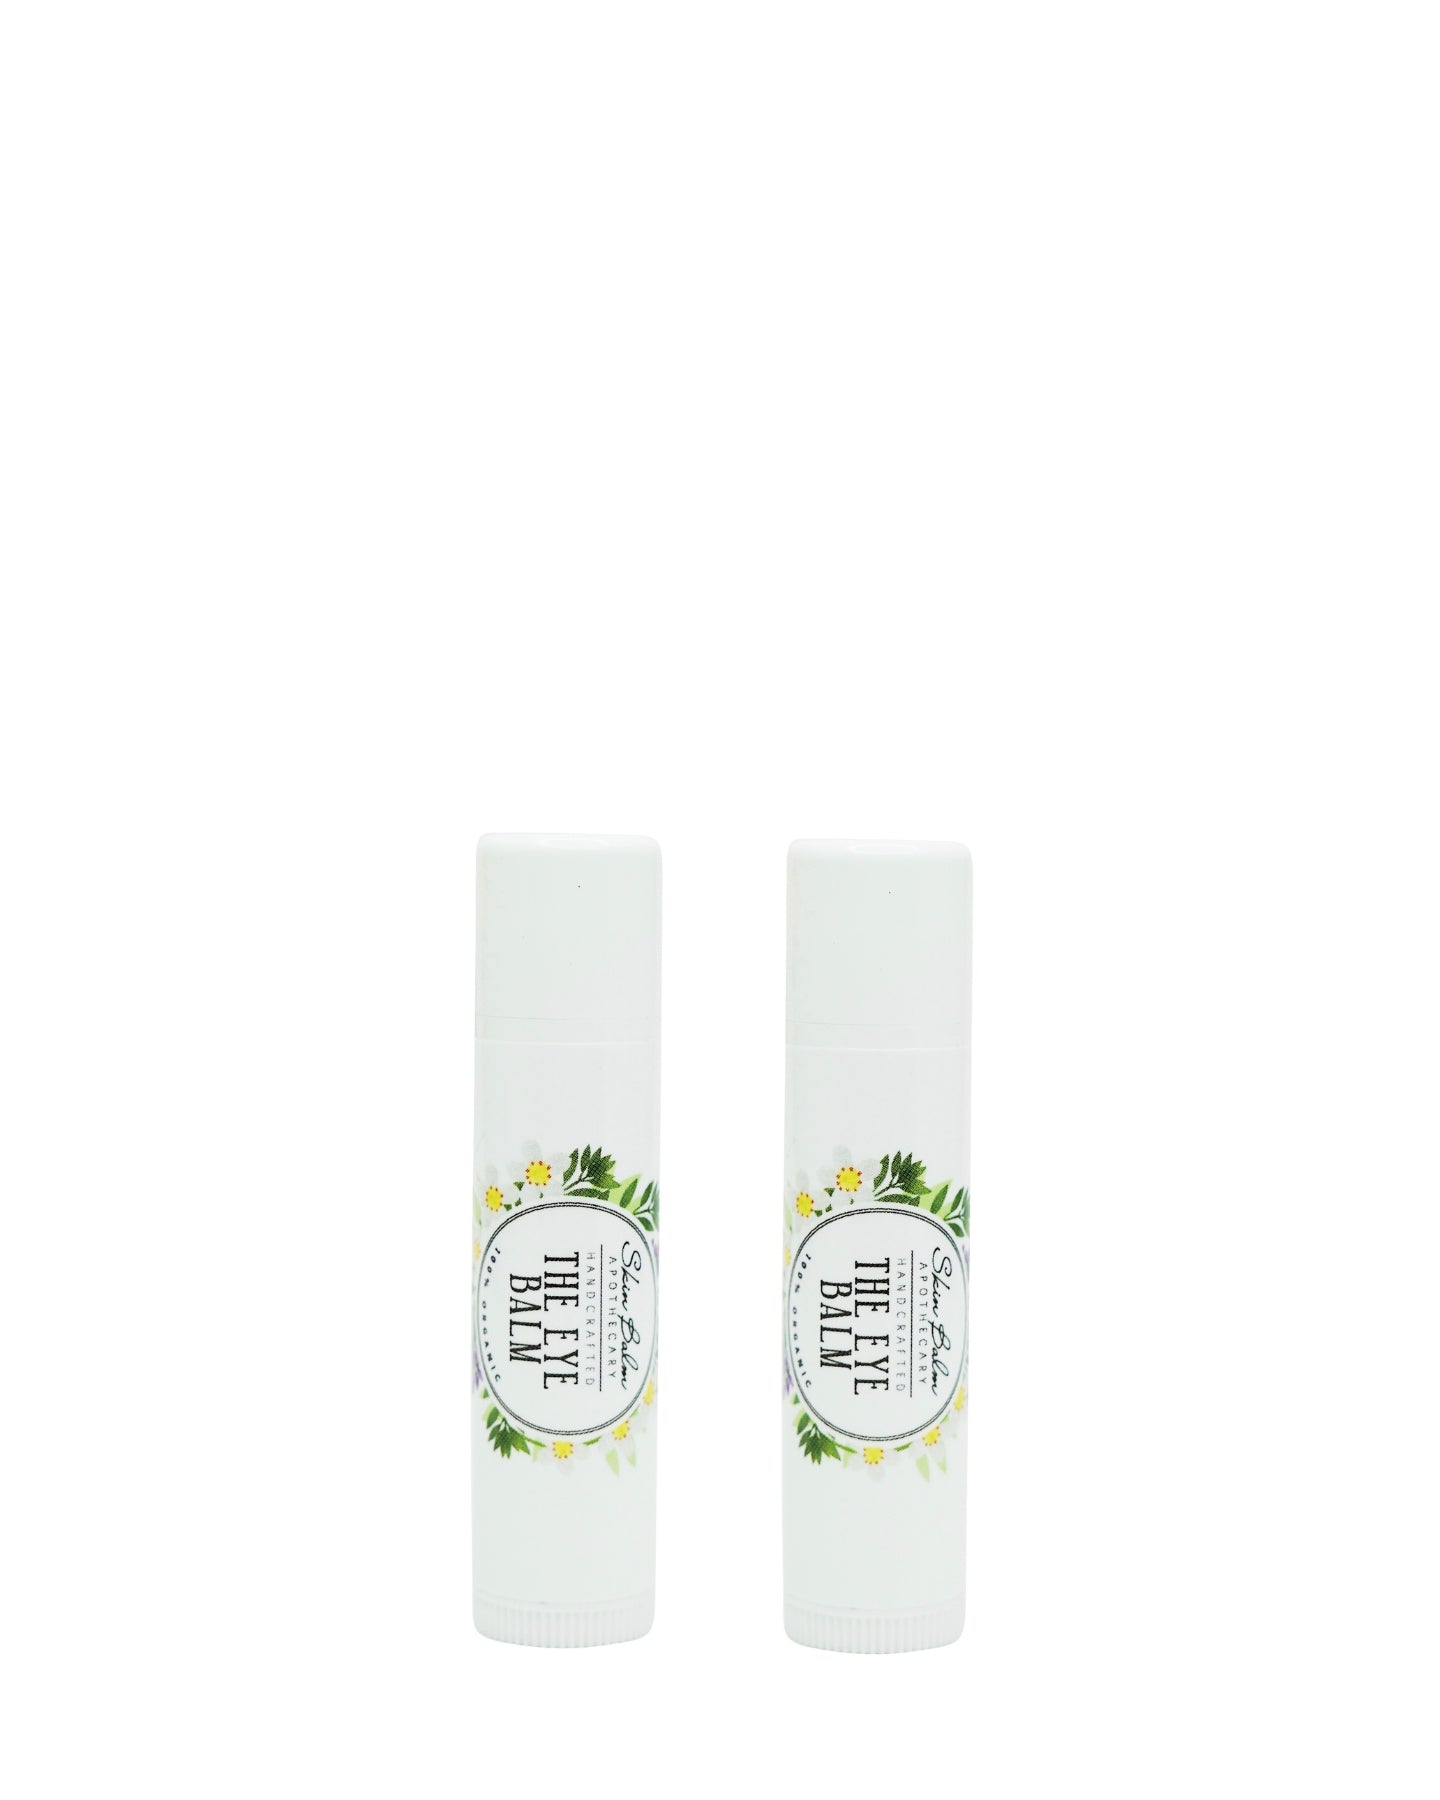 The Eye Balm™ Duo against a white background.